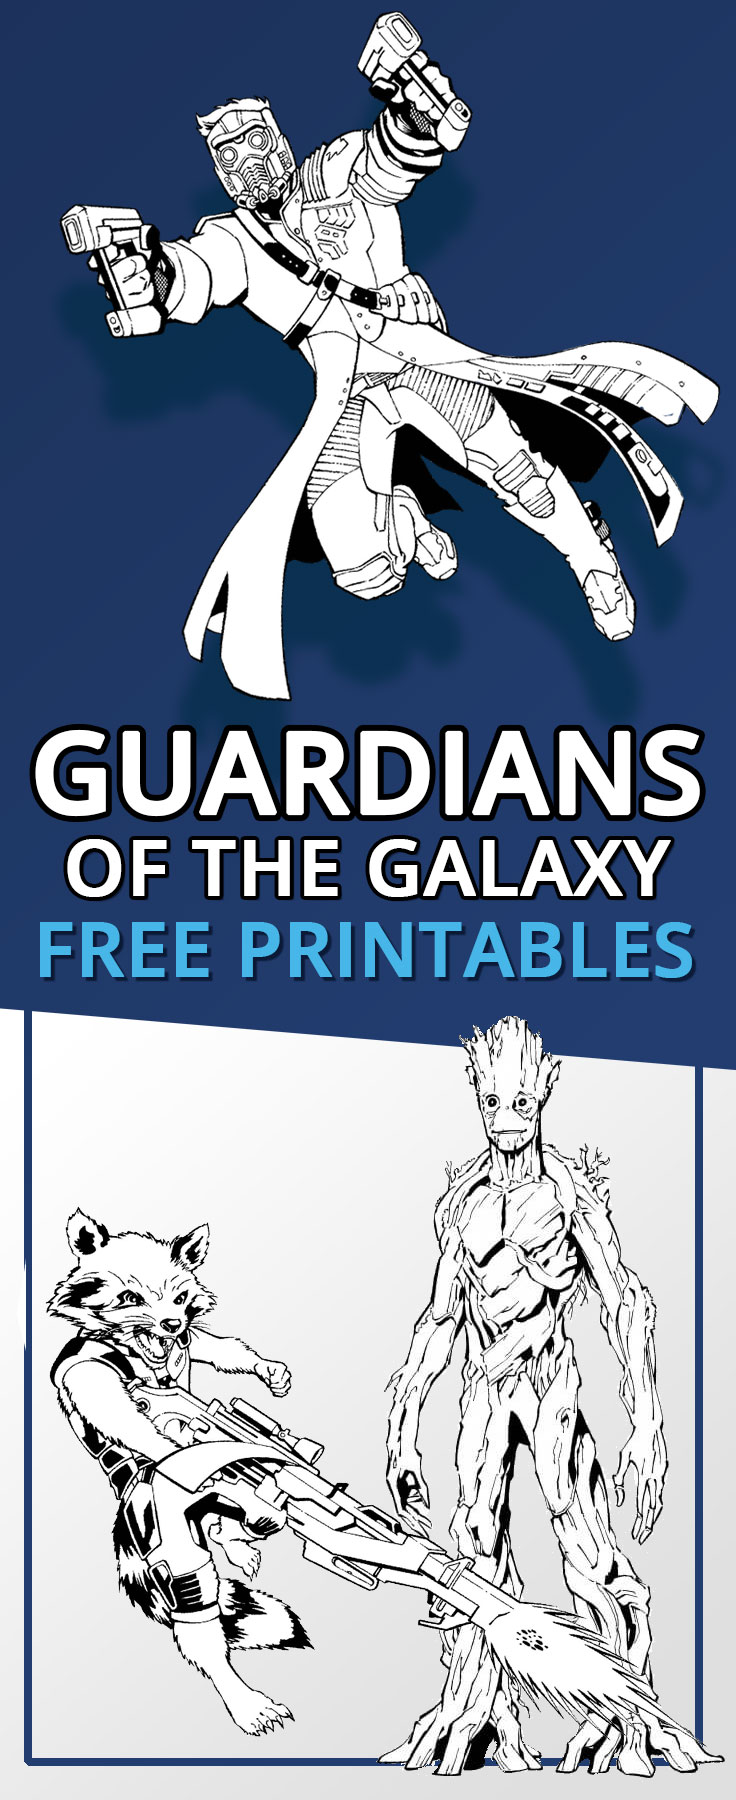 Guardians printables the FREE Galaxy of